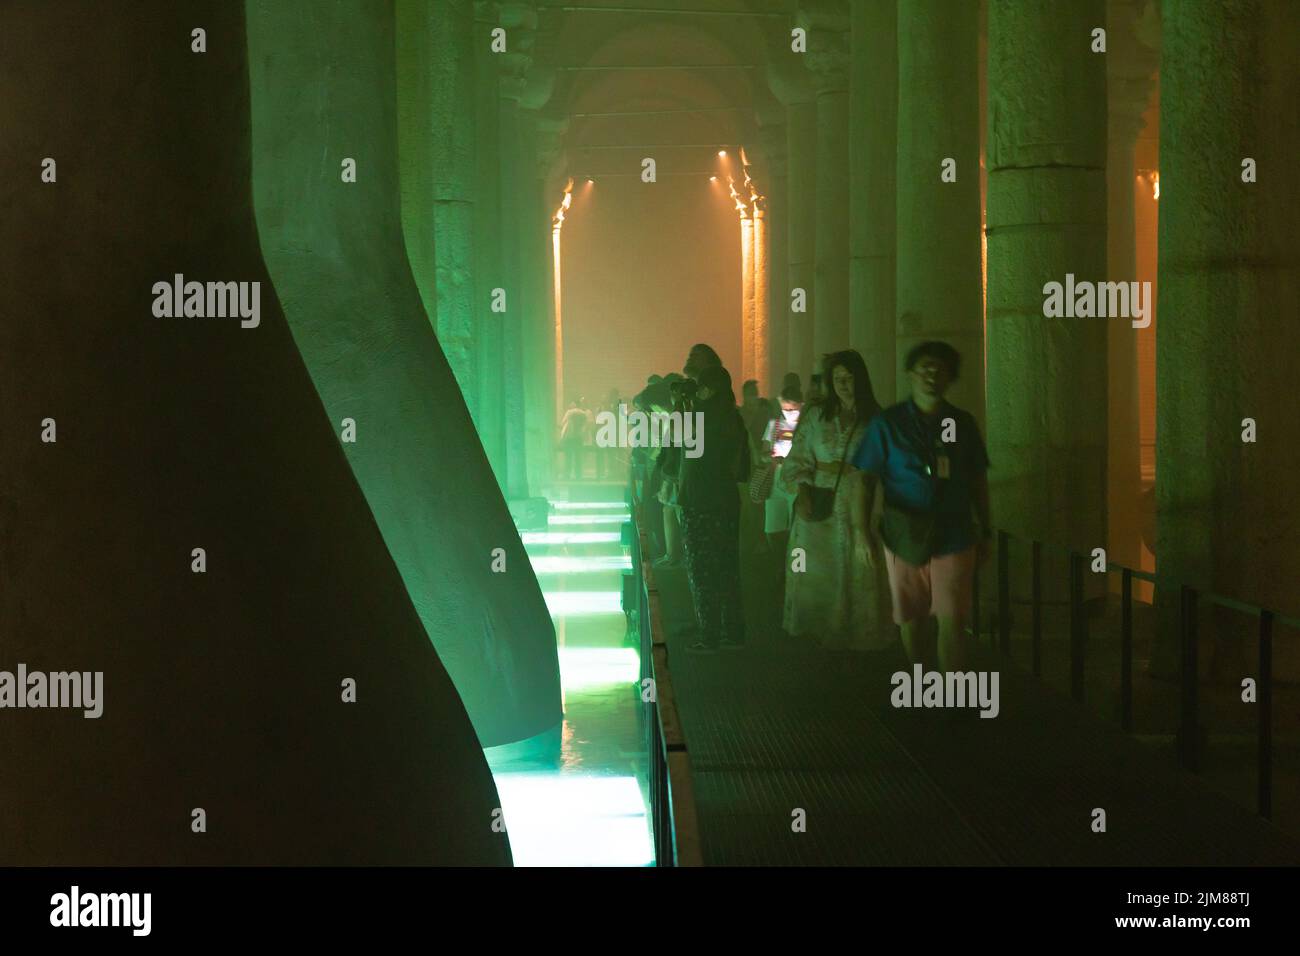 Tourists in the Basilica Cistern or Yerebatan Sarnici. Travel to Turkey background photo. Noise and grain included. Selective focus. Istanbul Turkey - Stock Photo